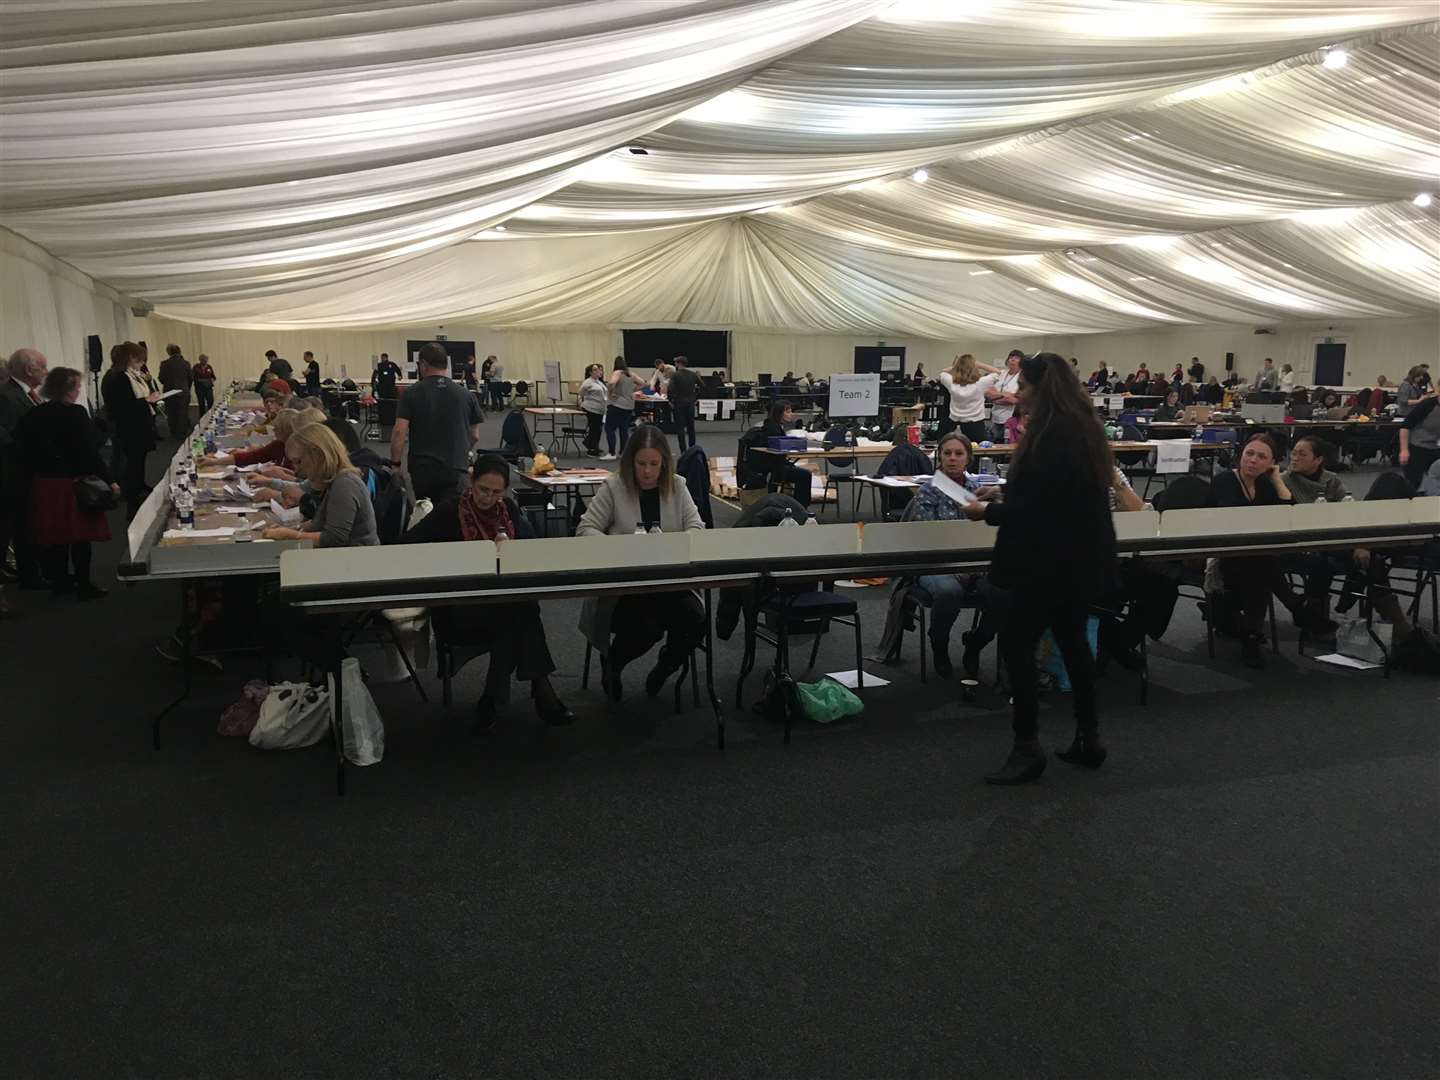 Counting in progress at the Kent Event Centre in Detling